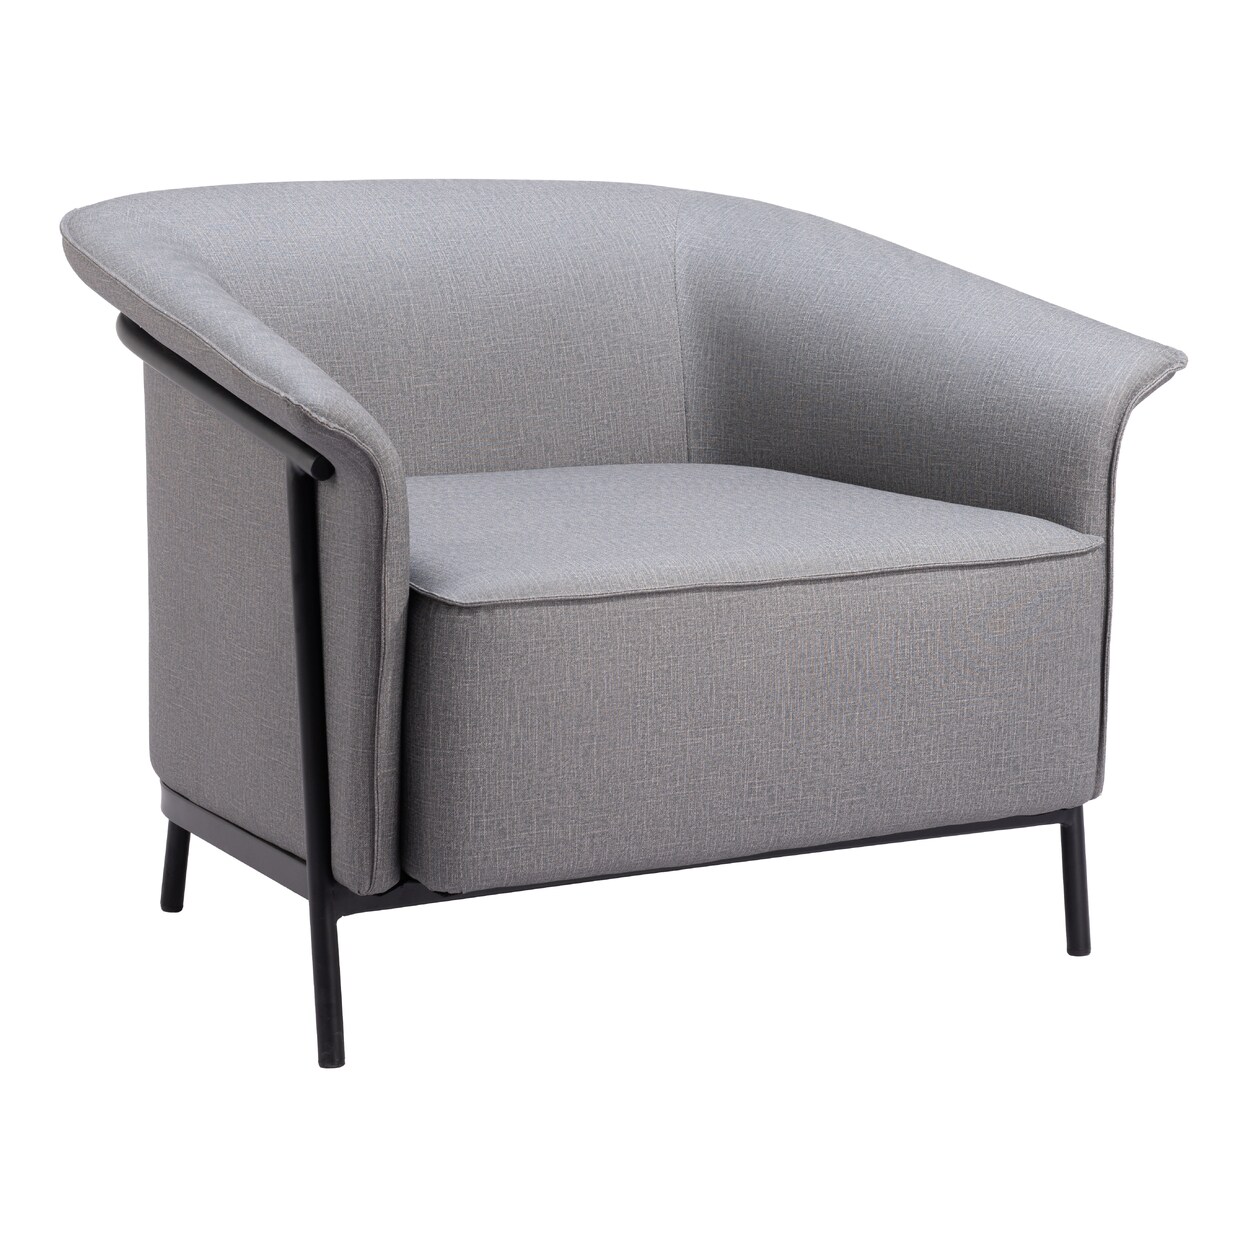 Zuo Modern Contemporary Inc. Burry Accent Chair Slate Gray